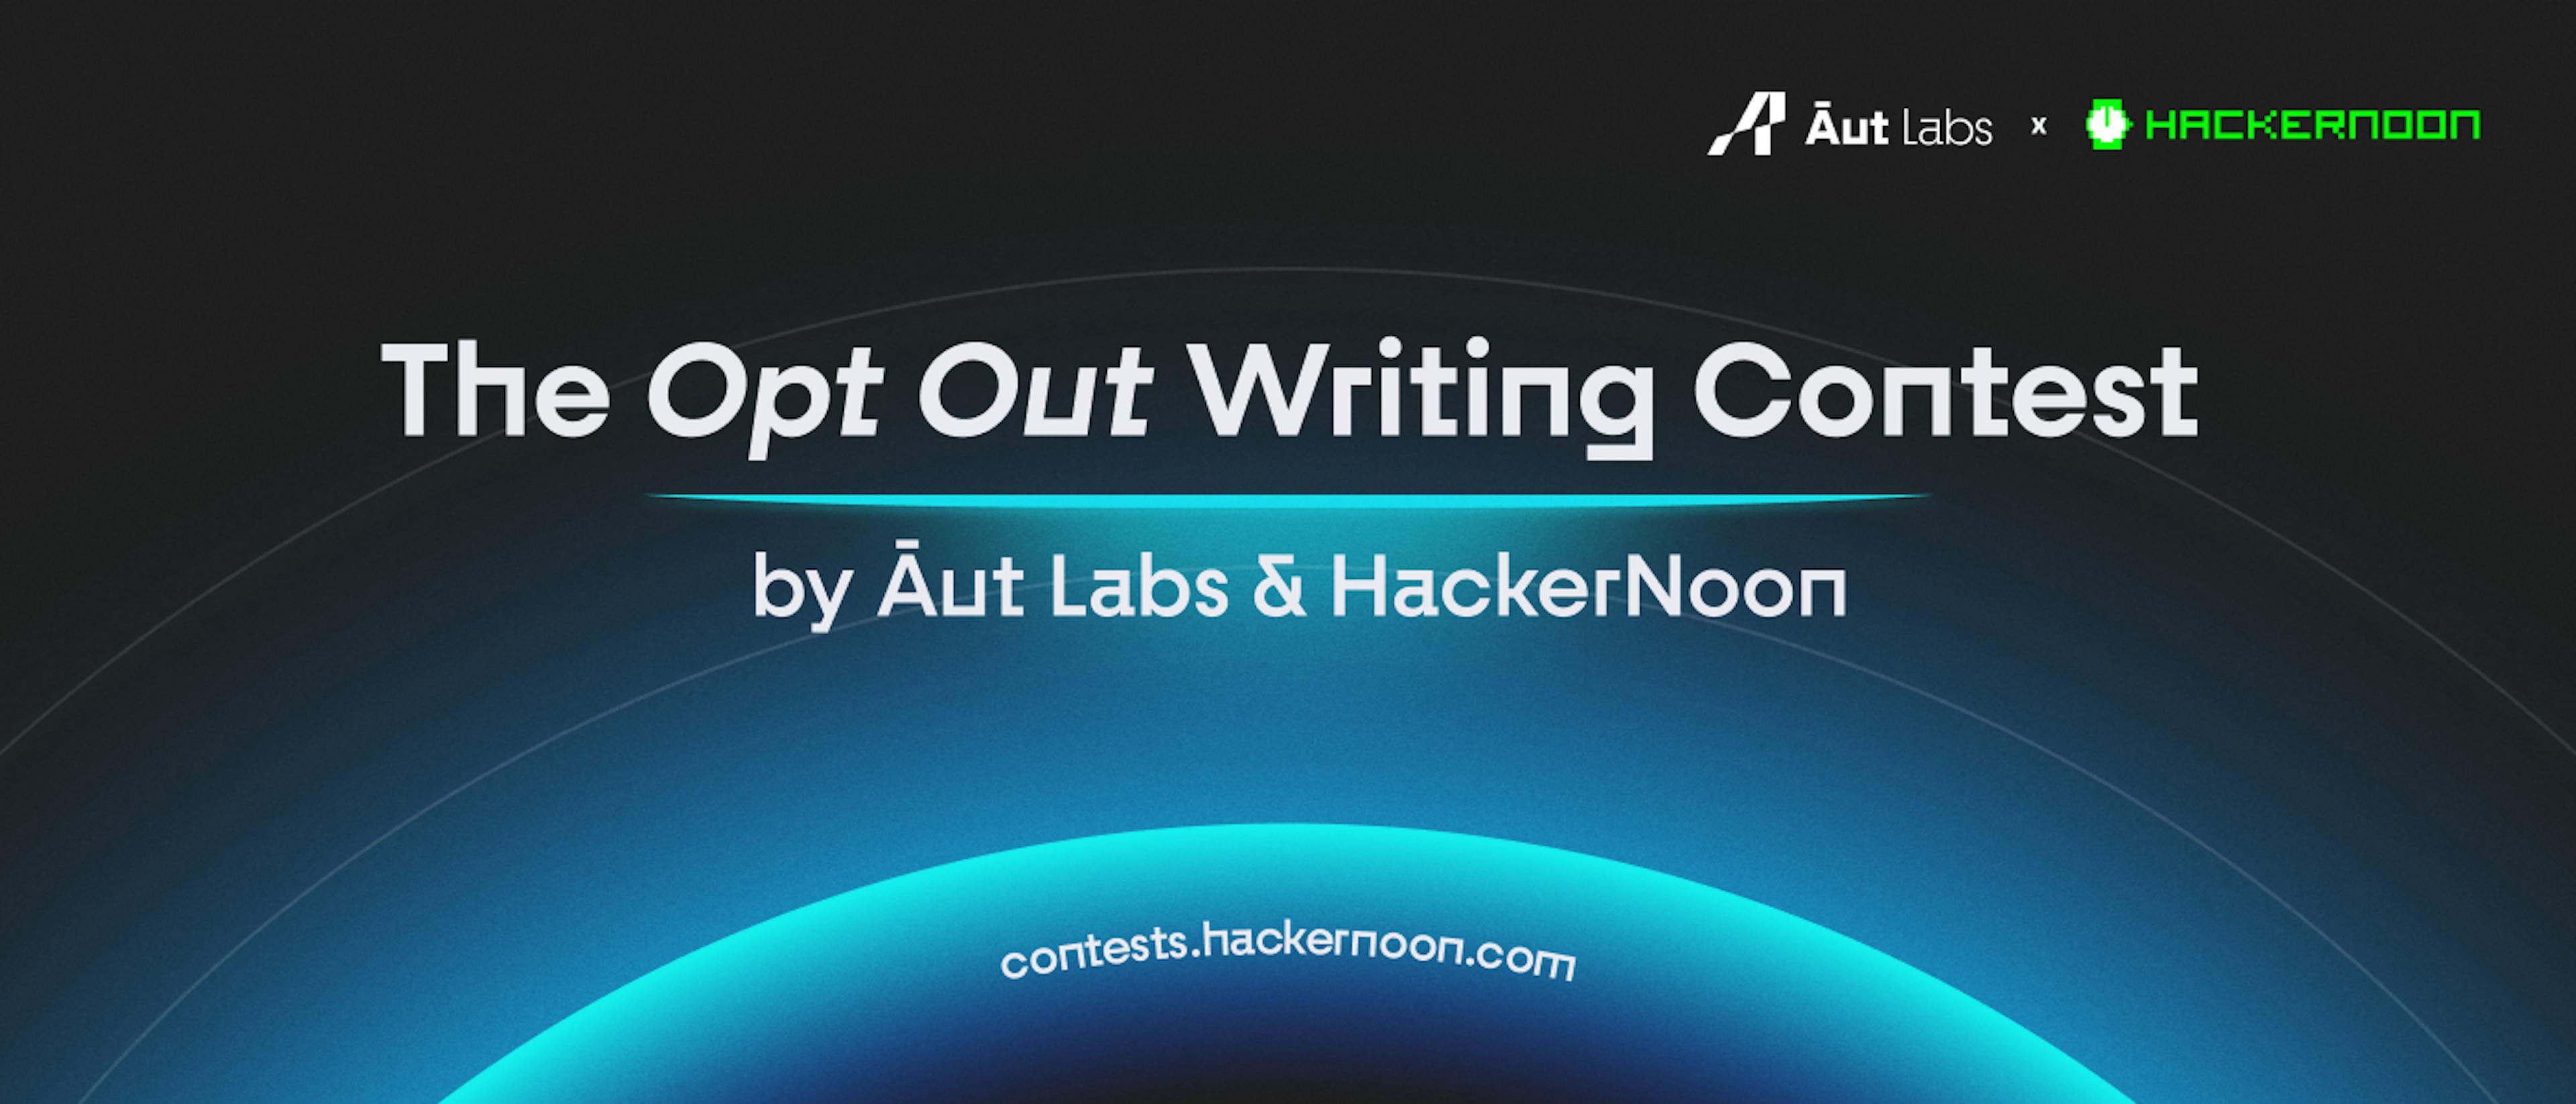 featured image - The #OptOut Writing Contest is Back: Enter Now and Compete for $6000 in Prizes